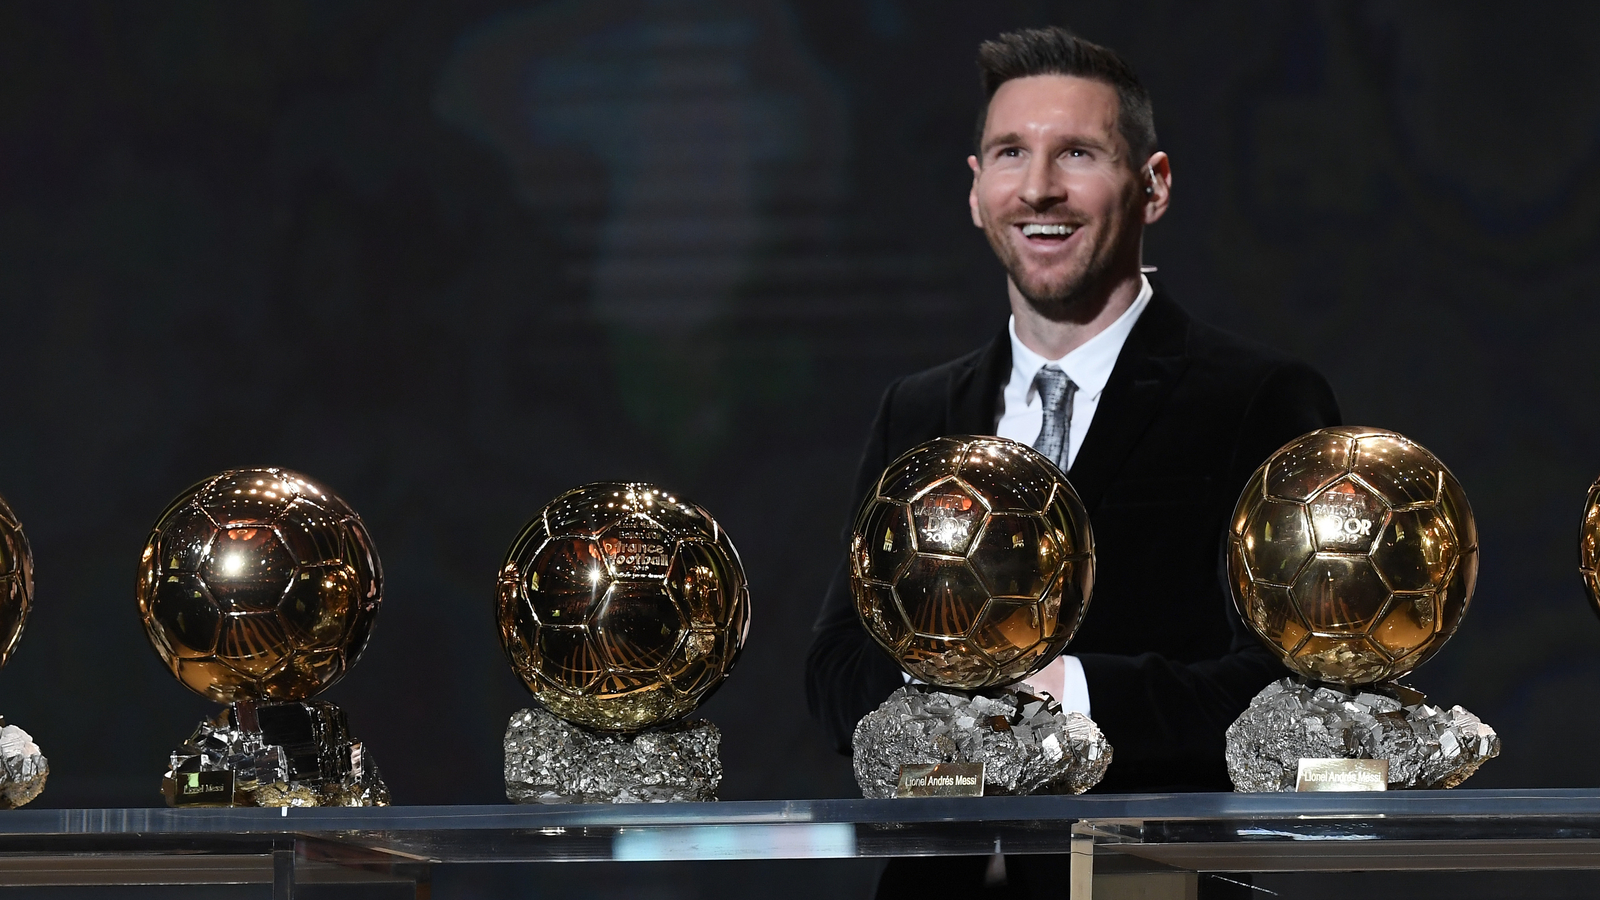 Messi was also named Sportsman of the Year by US magazine Time